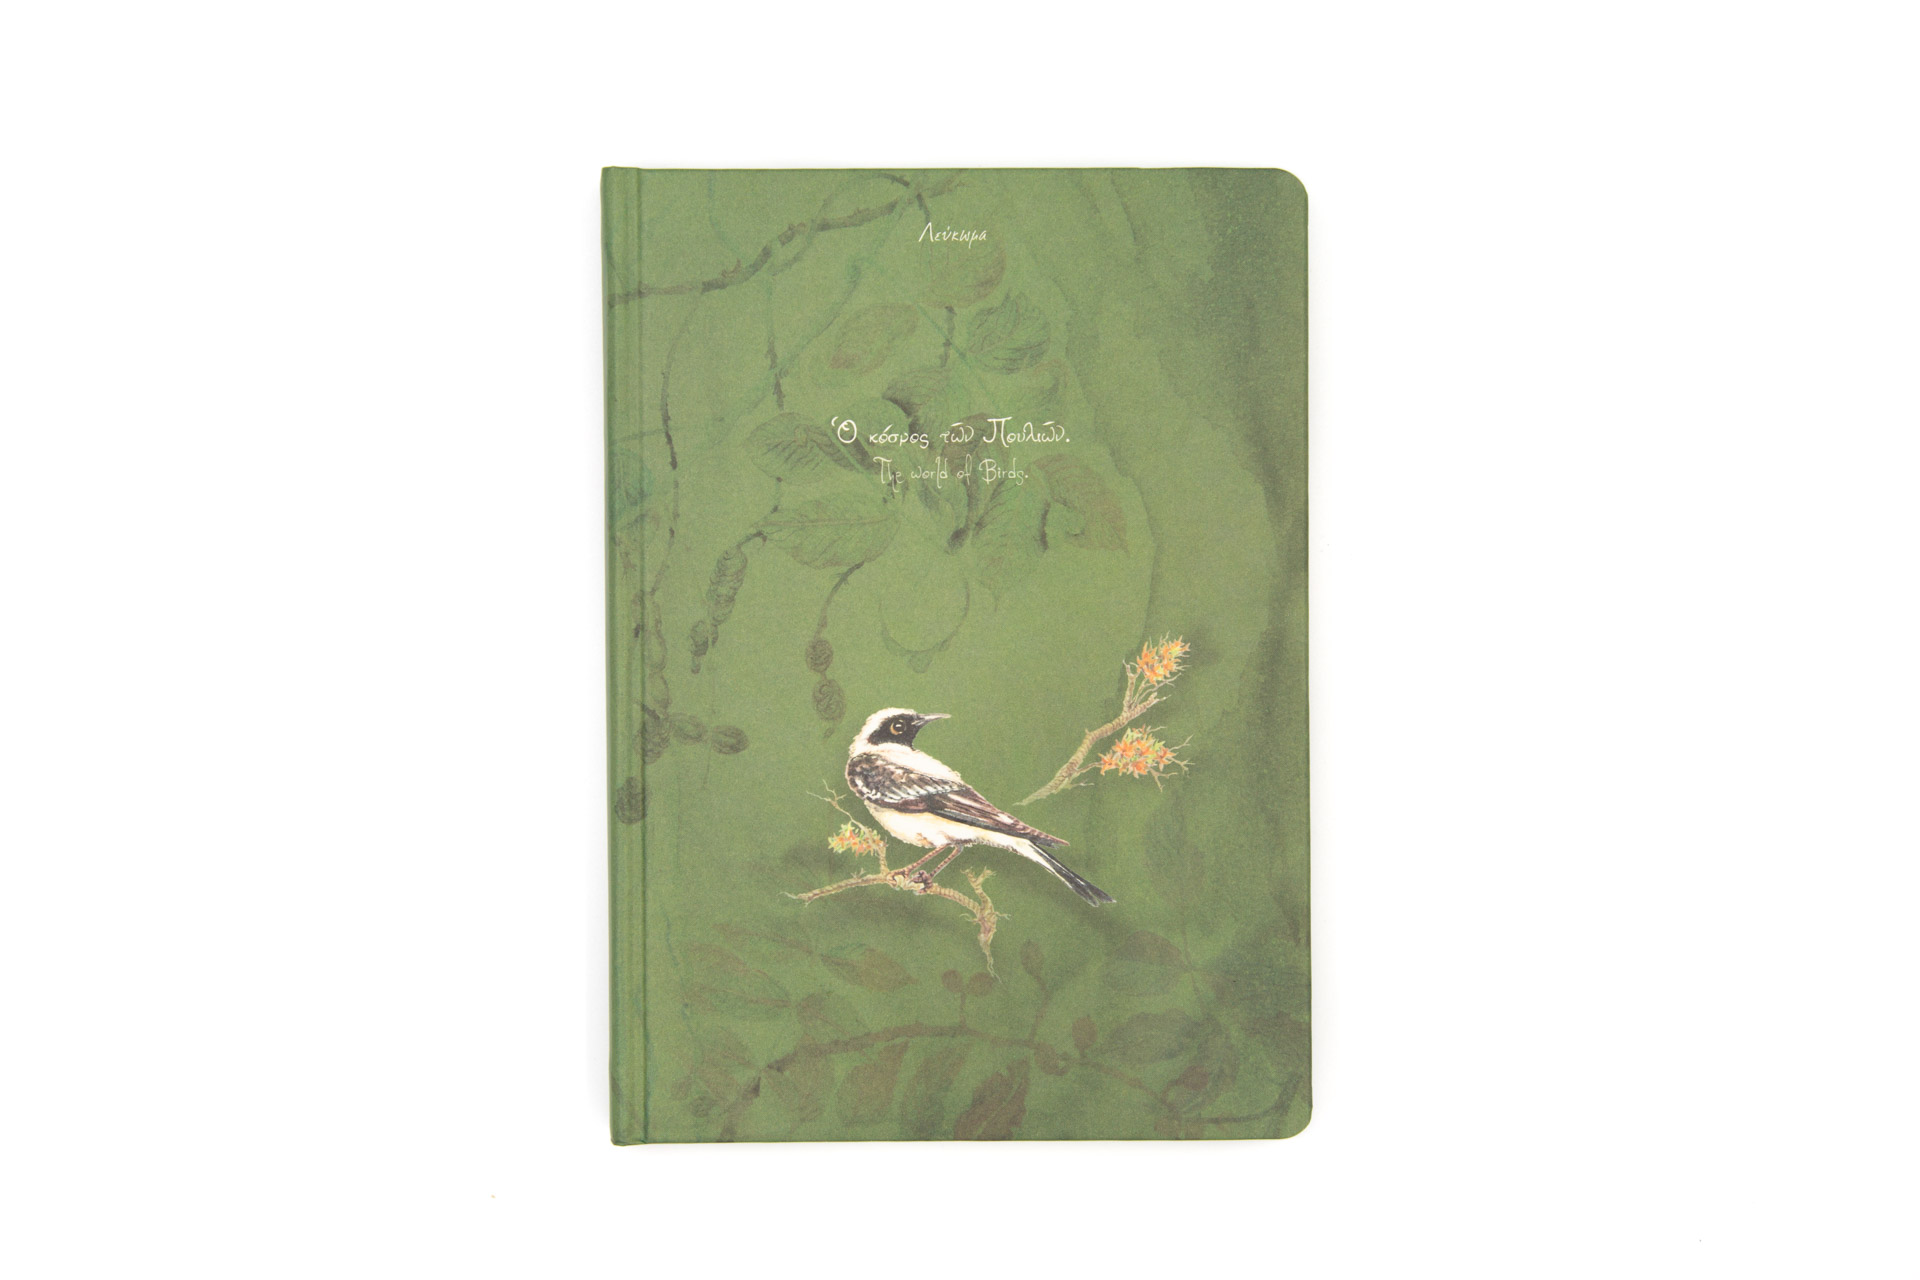 Book of secrets "the World of Birds" - Front